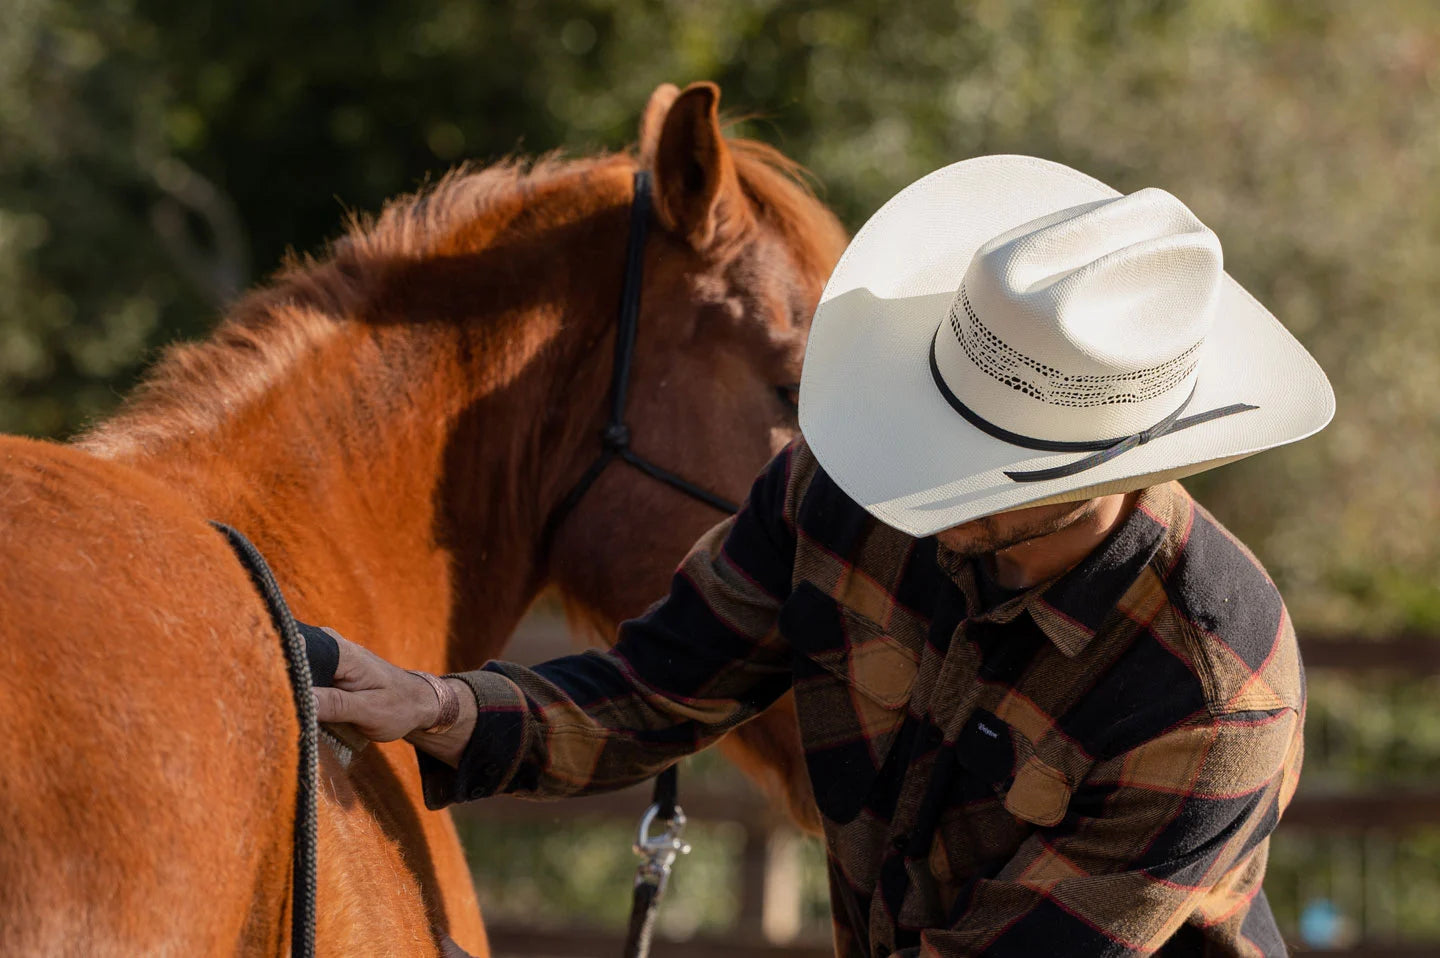 Man taking care of horse while wearing the Bozeman white cowboy hat by American Hat Makers